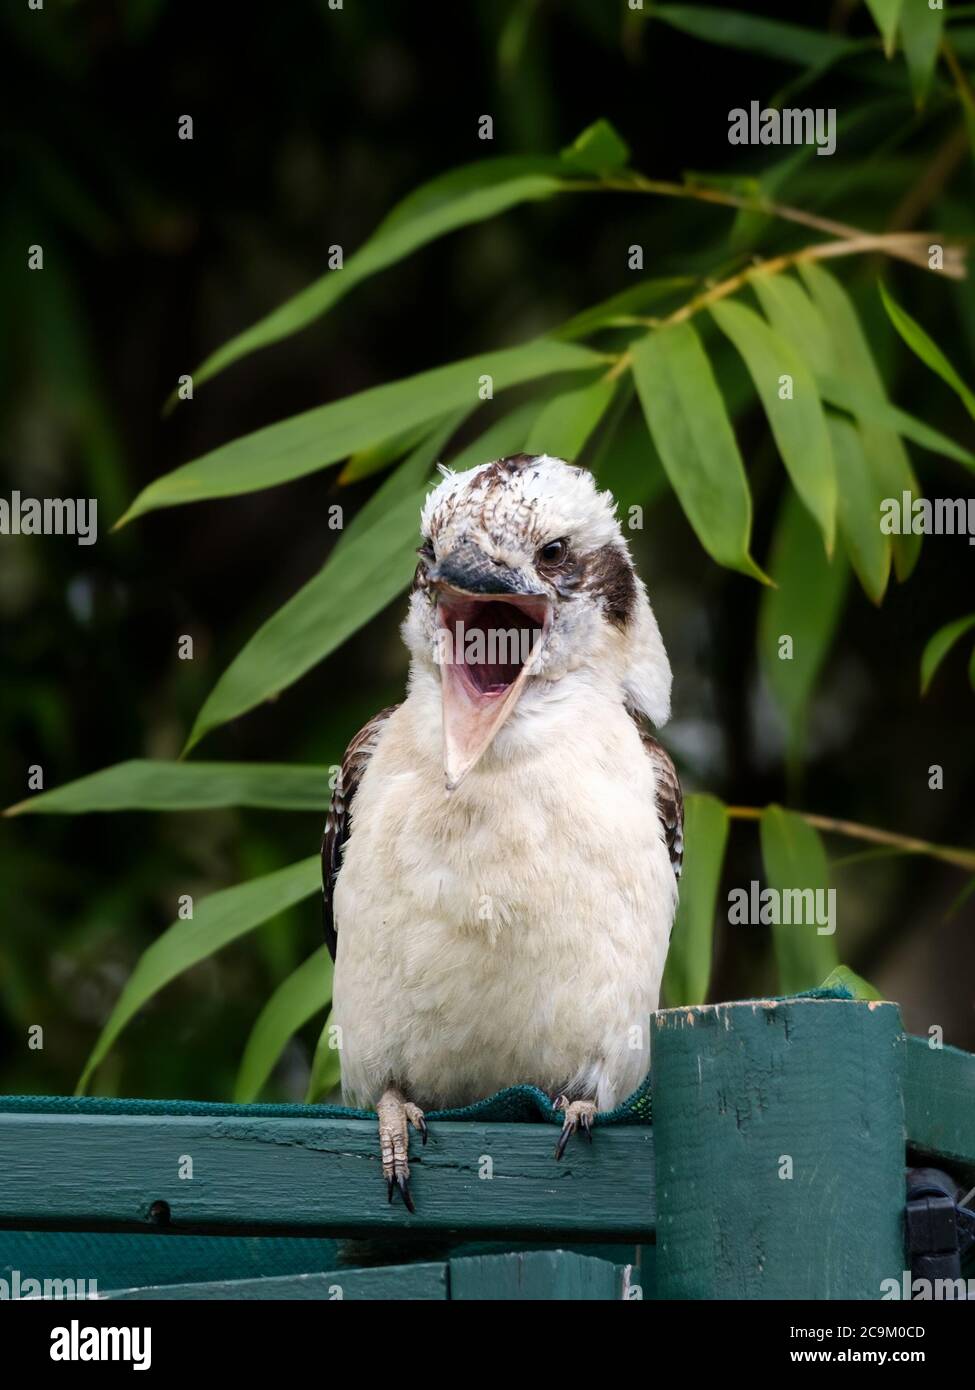 Front of an Australian Laughing Kookaburra (Dacelo novaeguineae) perched on a garden structure looking forward with wide open beak on a background of Stock Photo